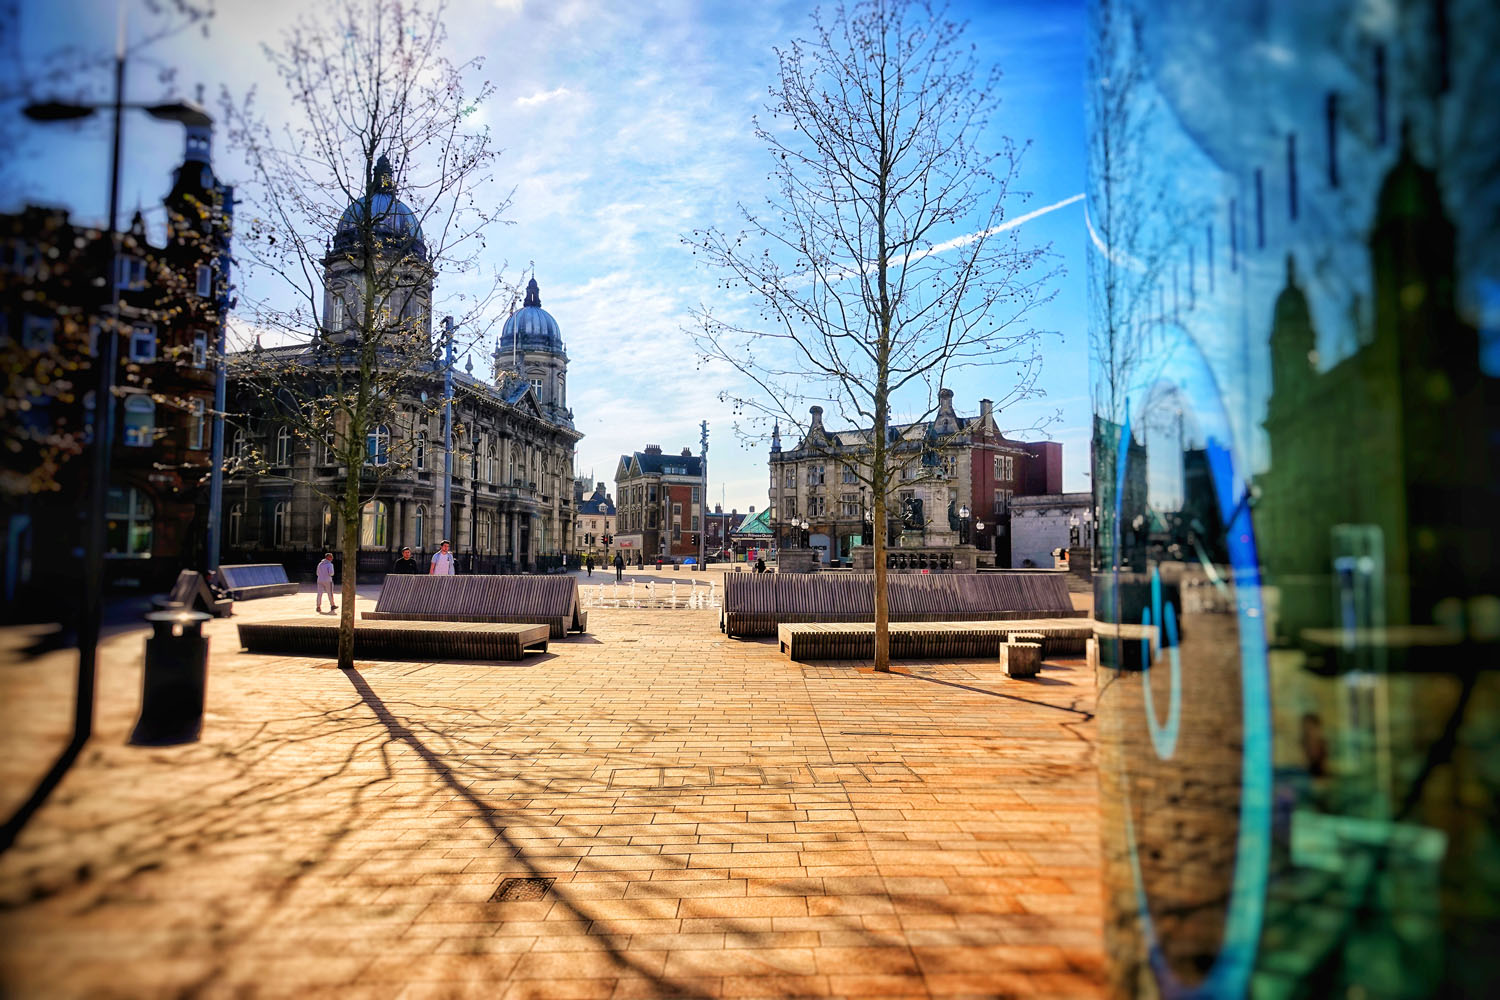 City centre buildings with a blue sky and light coloured paving, with trees and outdoor seating